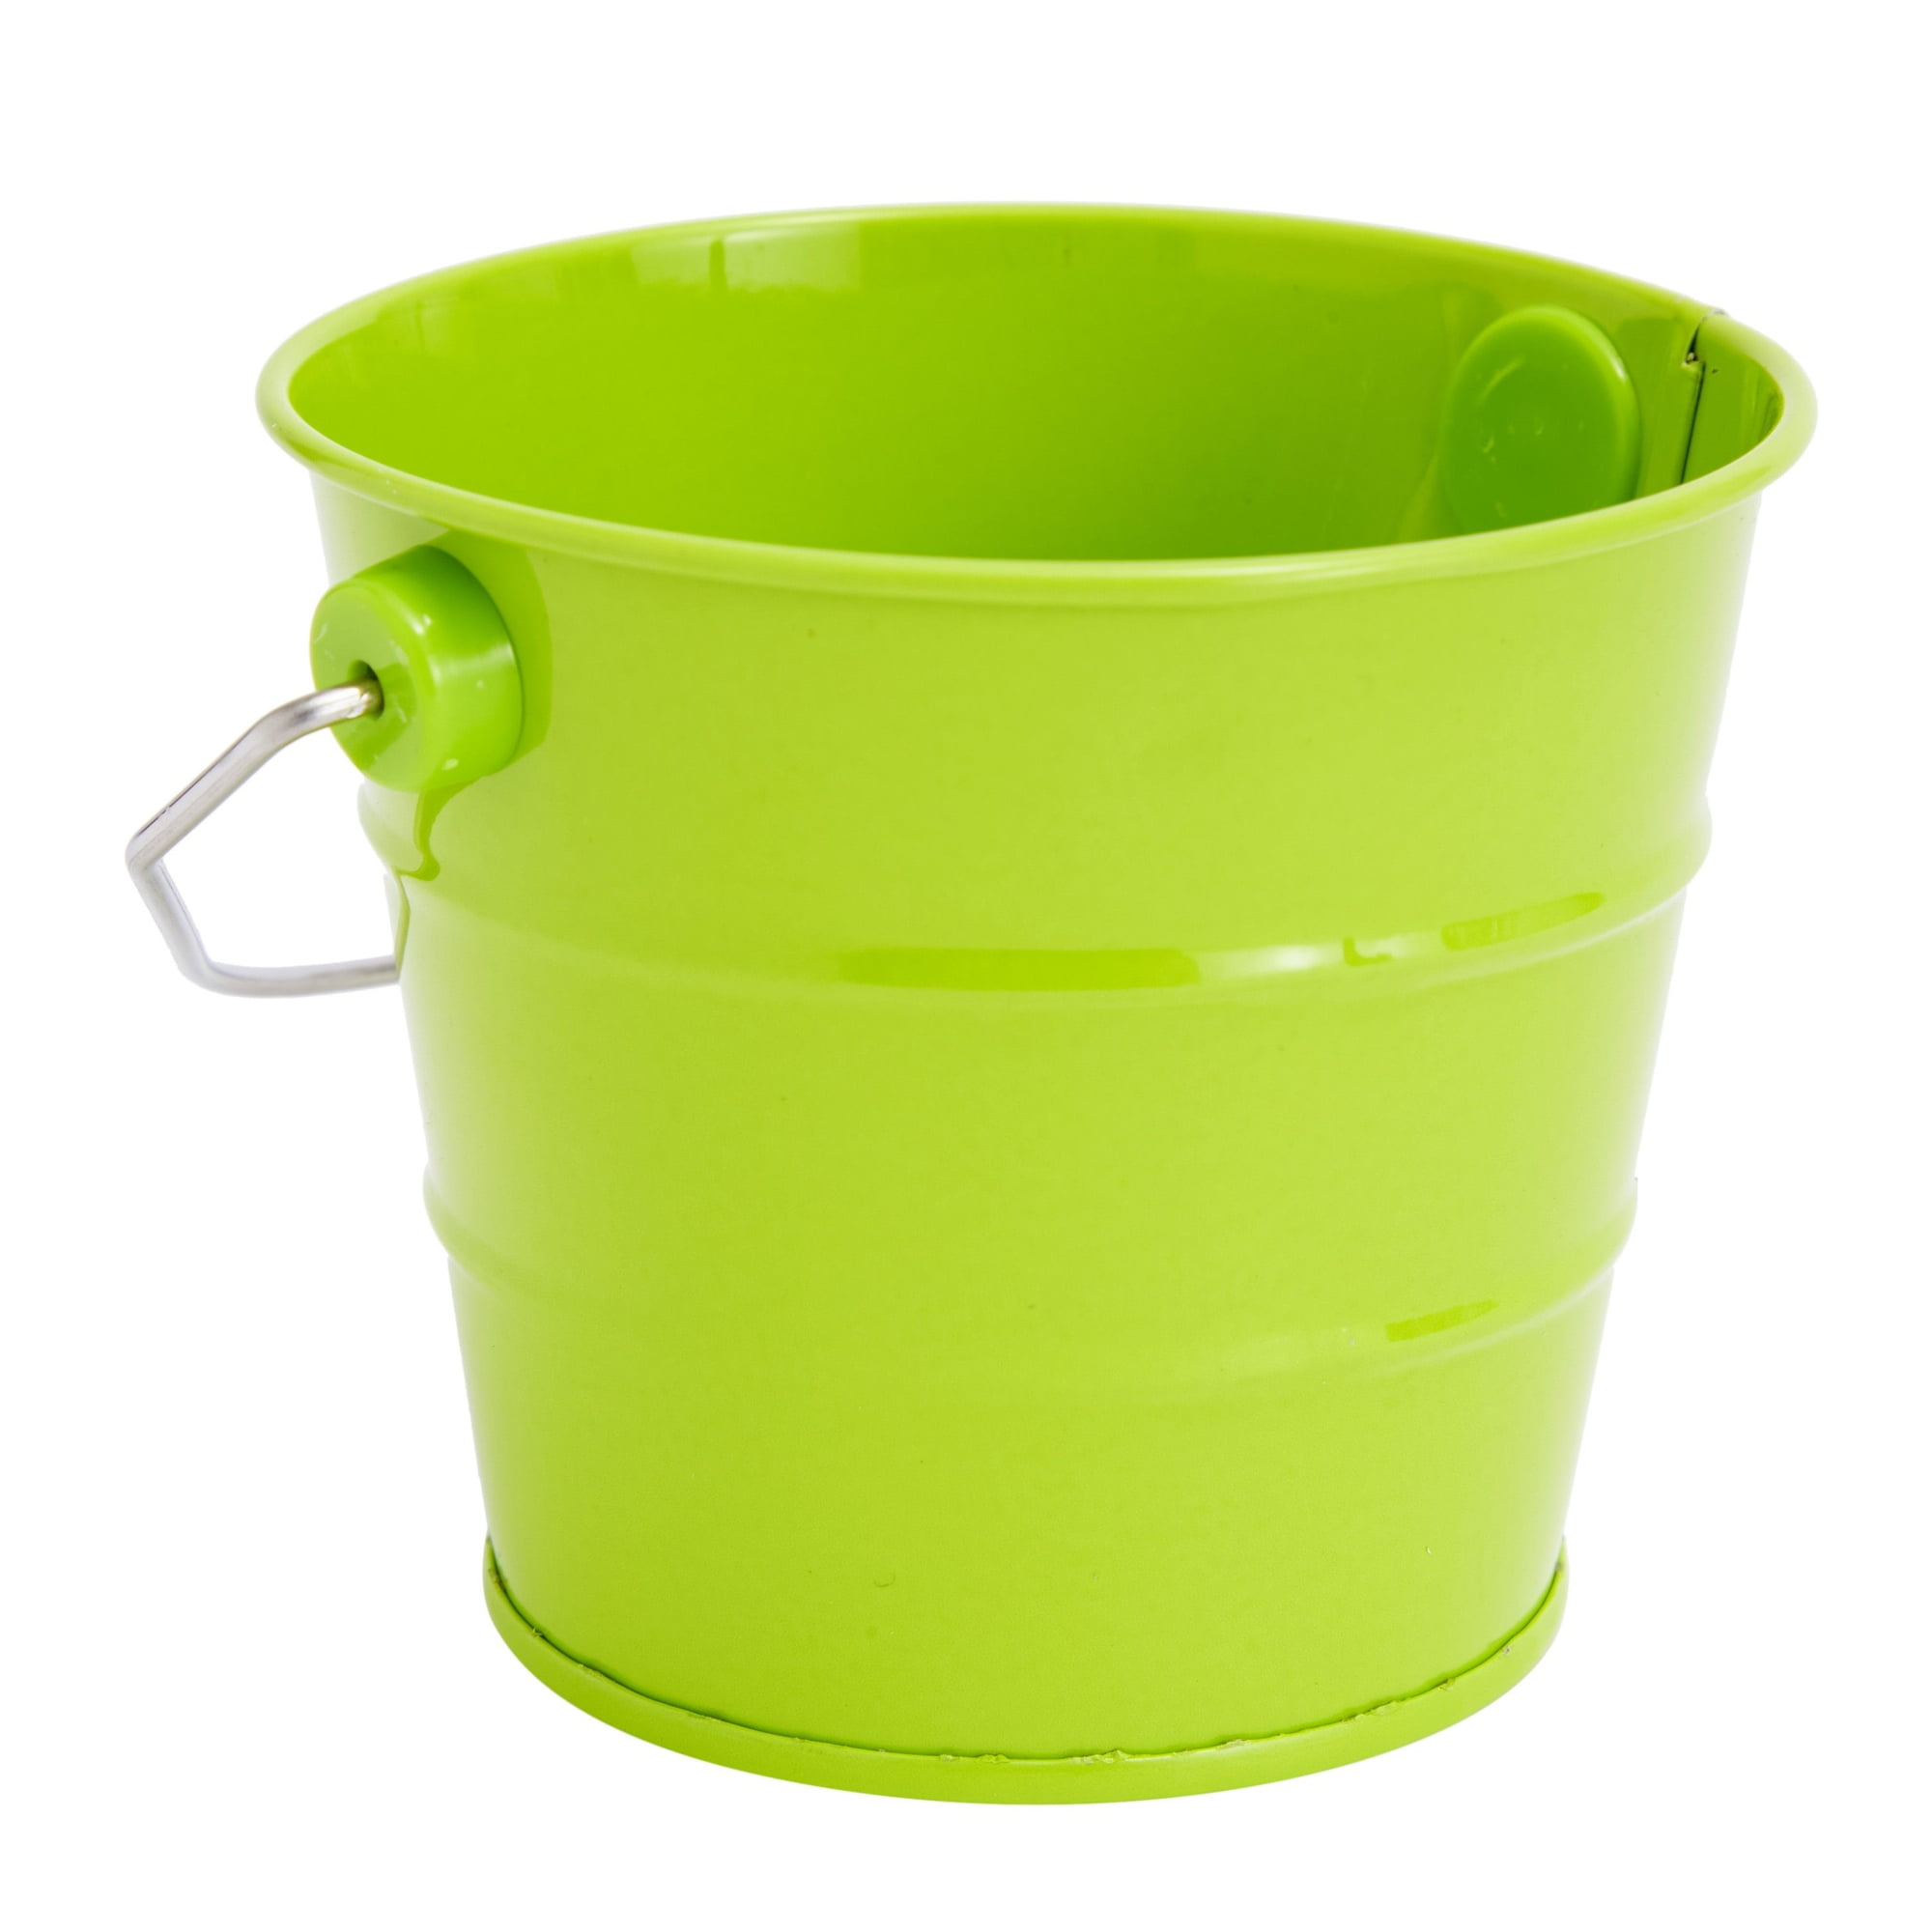 TAKMA Small Metal Buckets with Handle - 6 Pack 4.3 Inch Colored Galvanized  Bucket for Kids,Classroom,Crafts,and Party Favors (Green Blue, 4.3 Top)